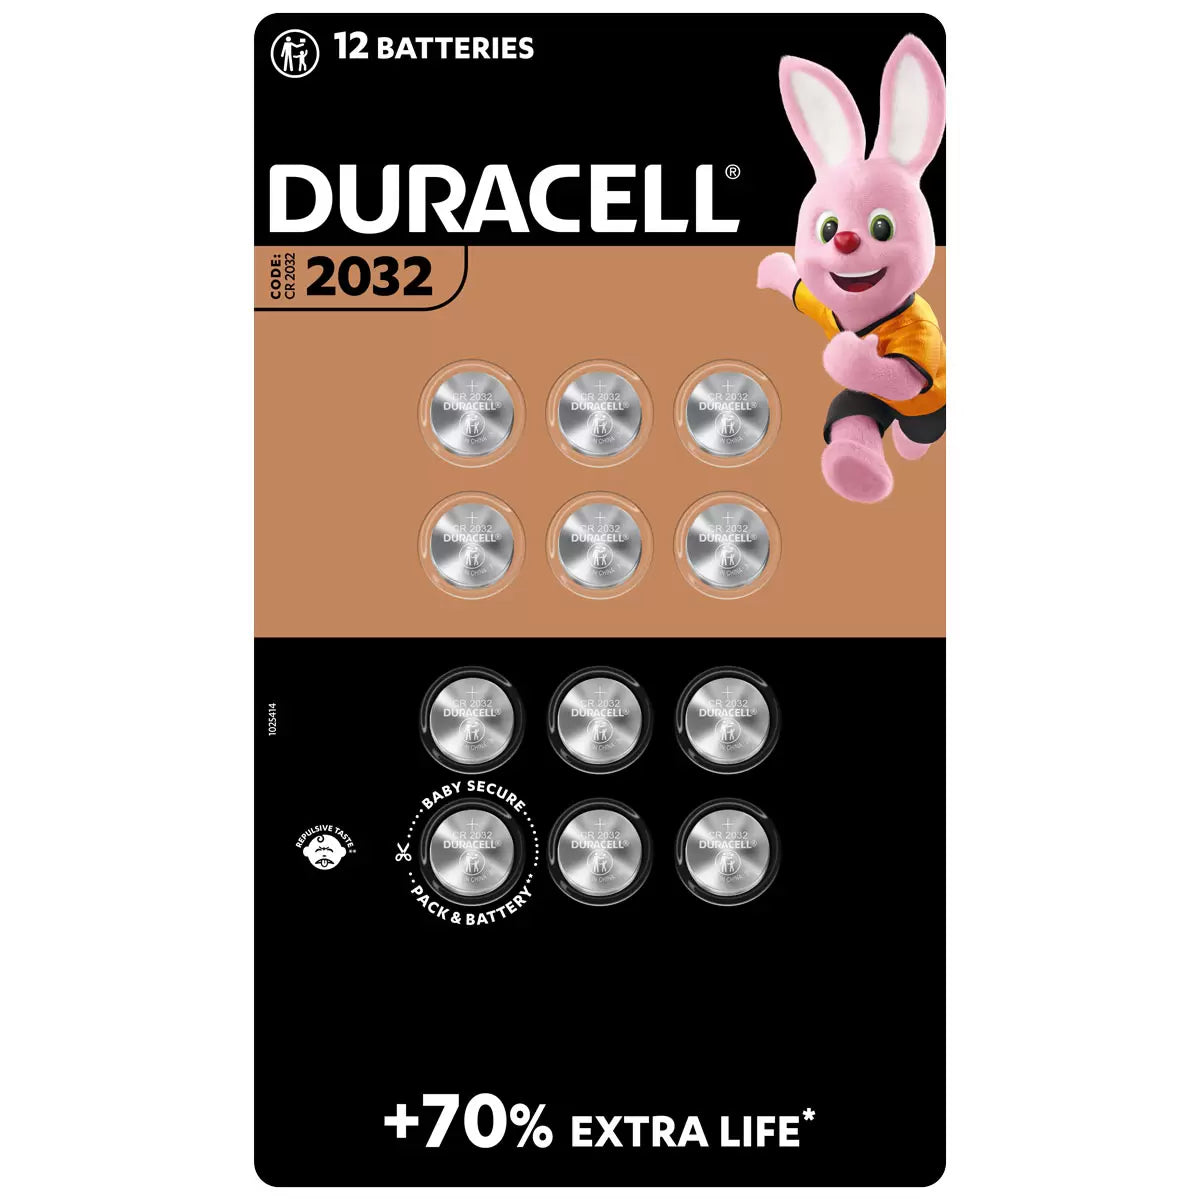 Duracell Lithium Coin Battery - 12 Pack